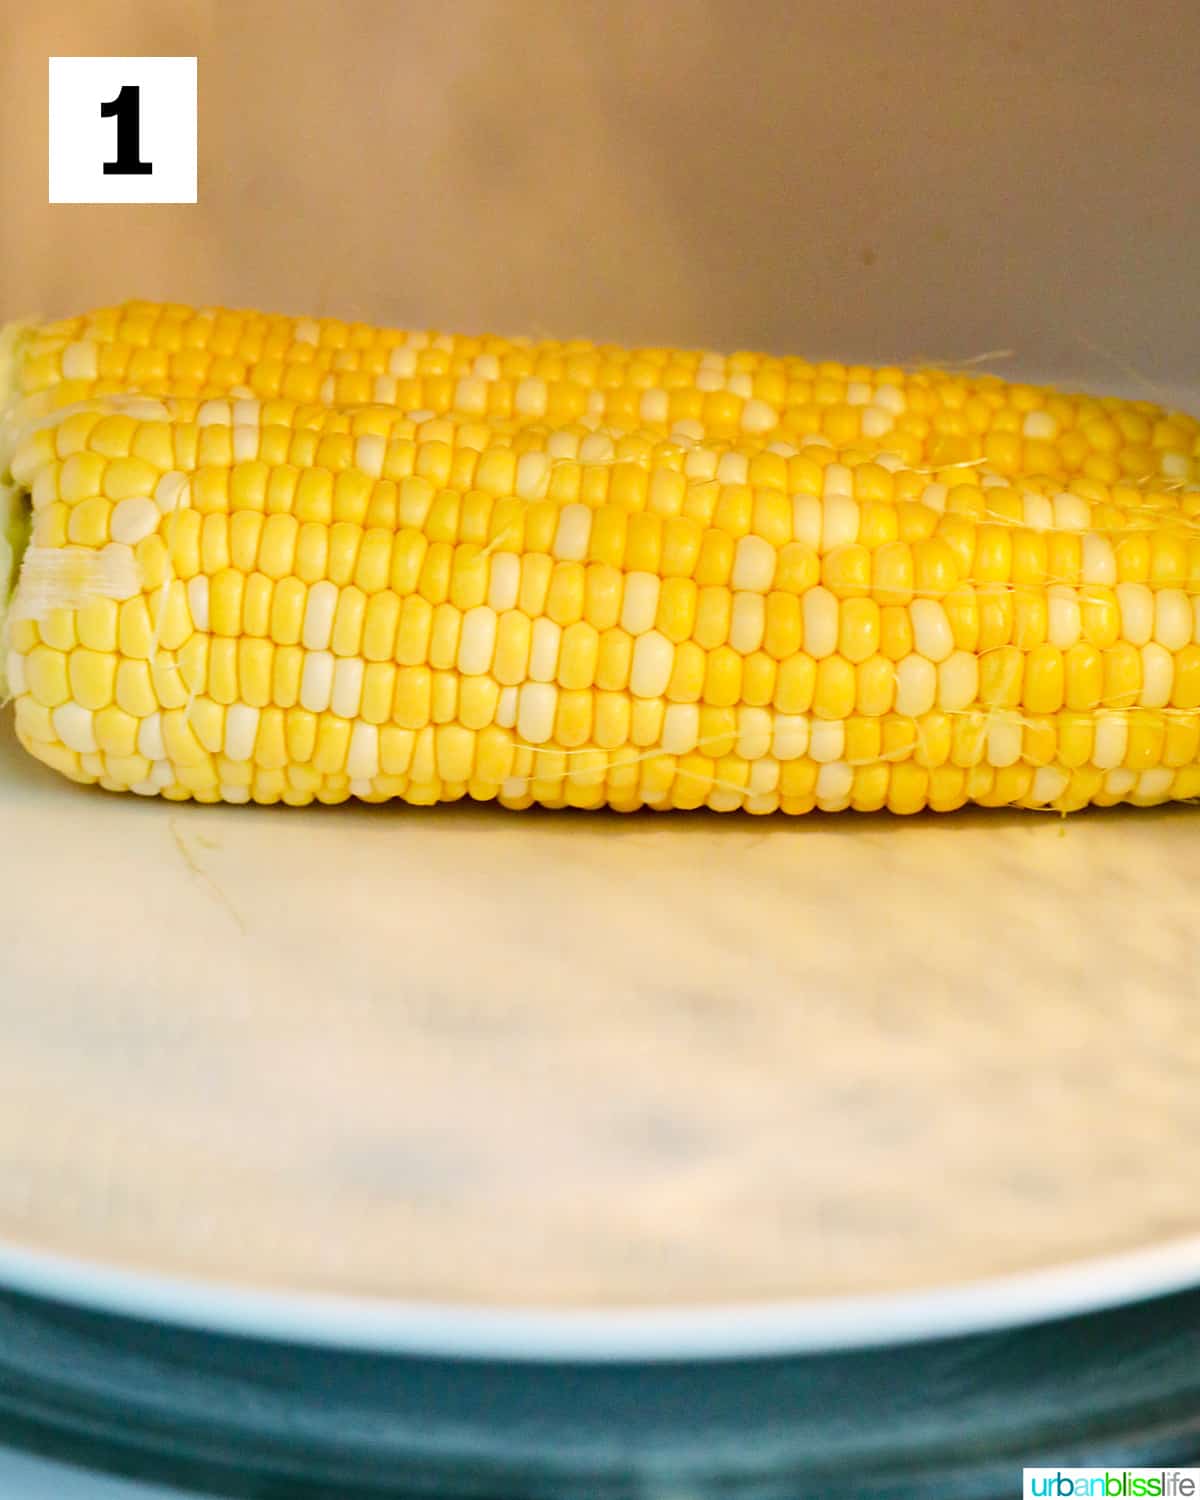 corn on the cob on a plate in the microwave.